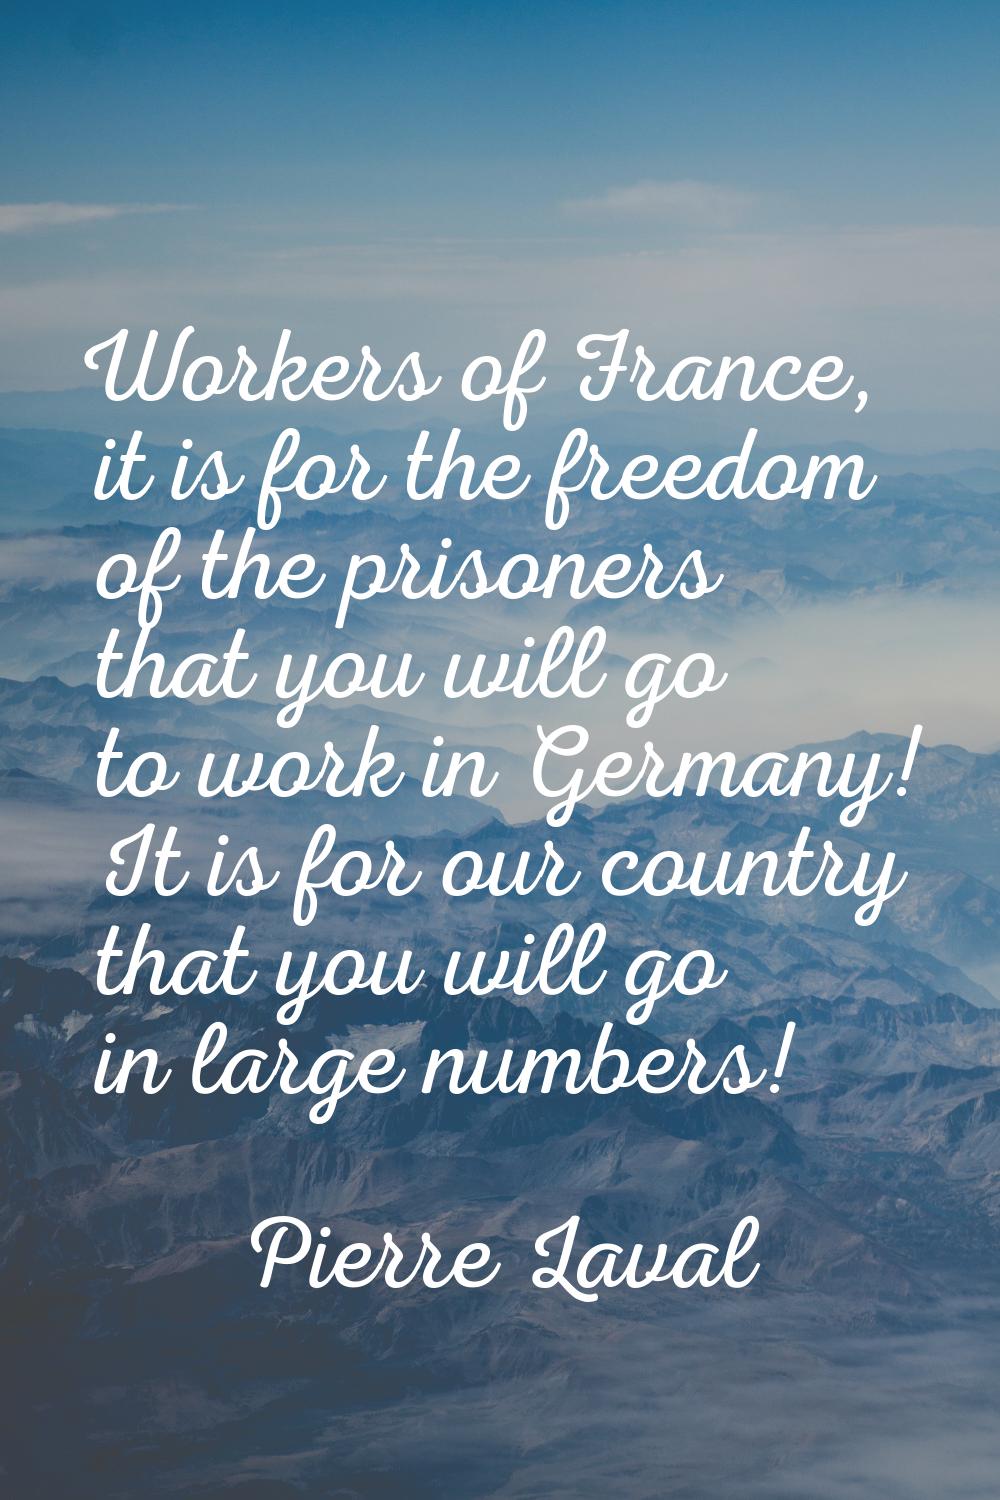 Workers of France, it is for the freedom of the prisoners that you will go to work in Germany! It i